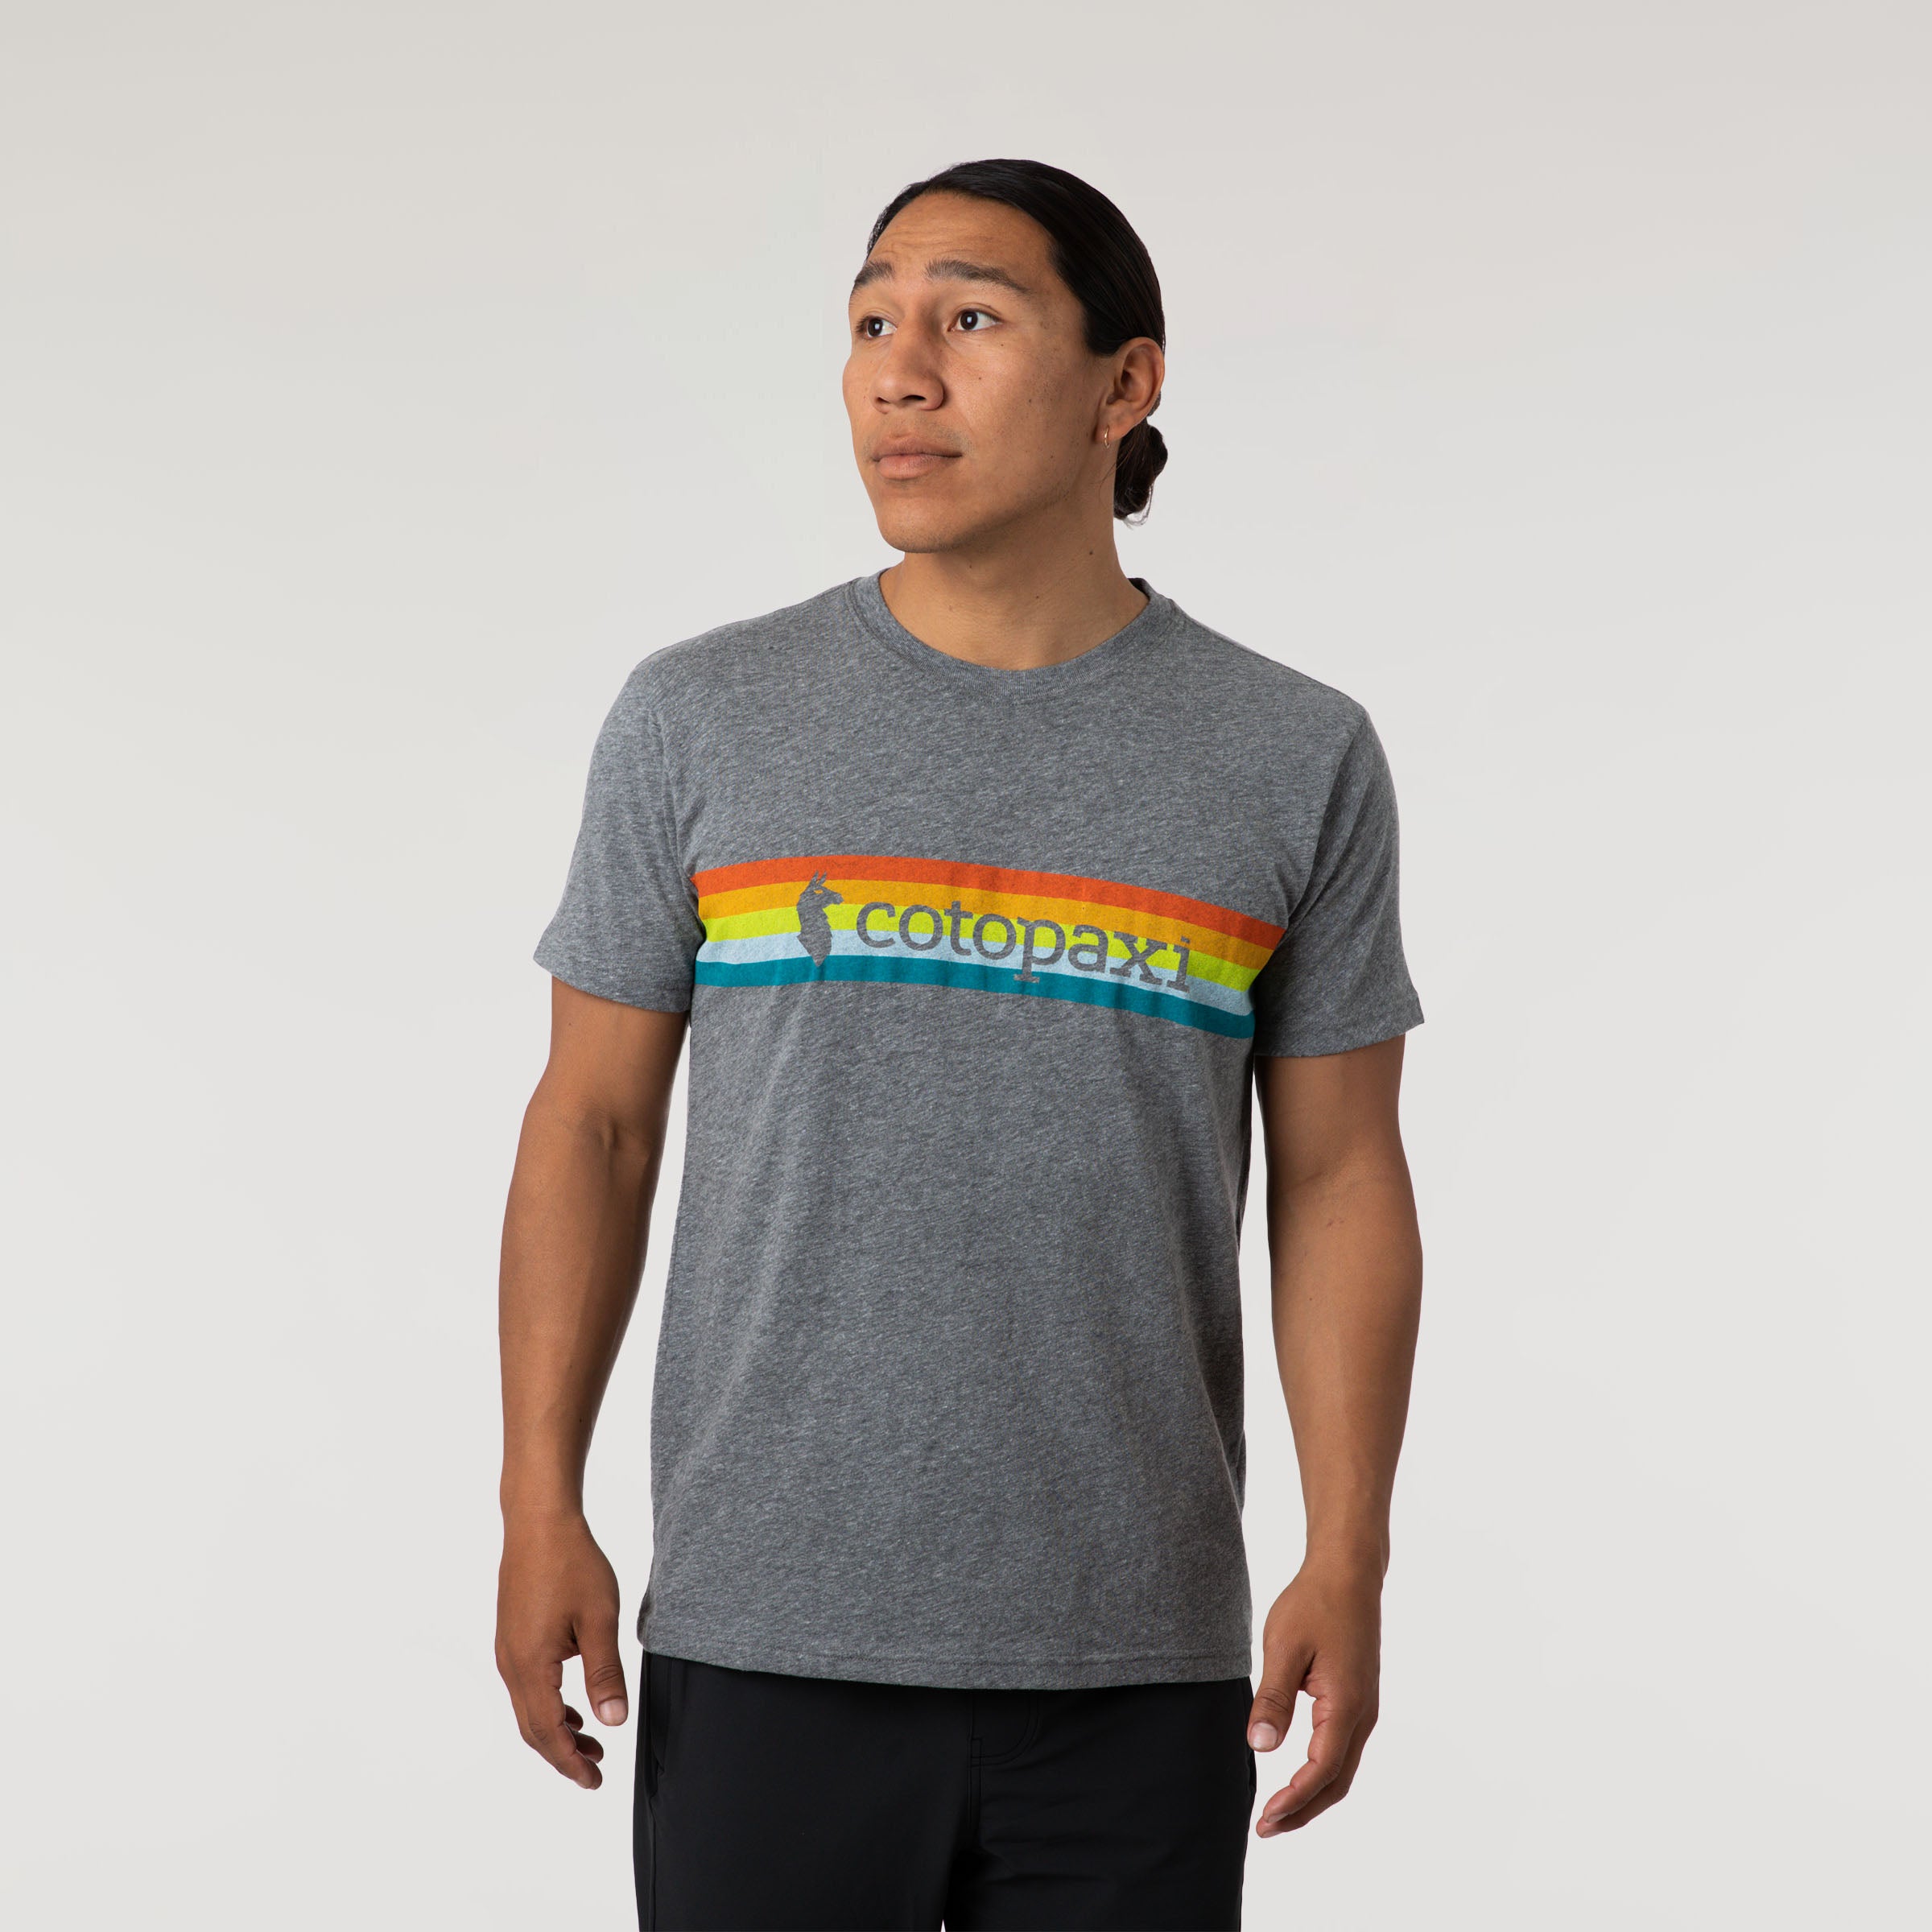 Foresee Bule udredning Cotopaxi T-Shirt On The Horizon